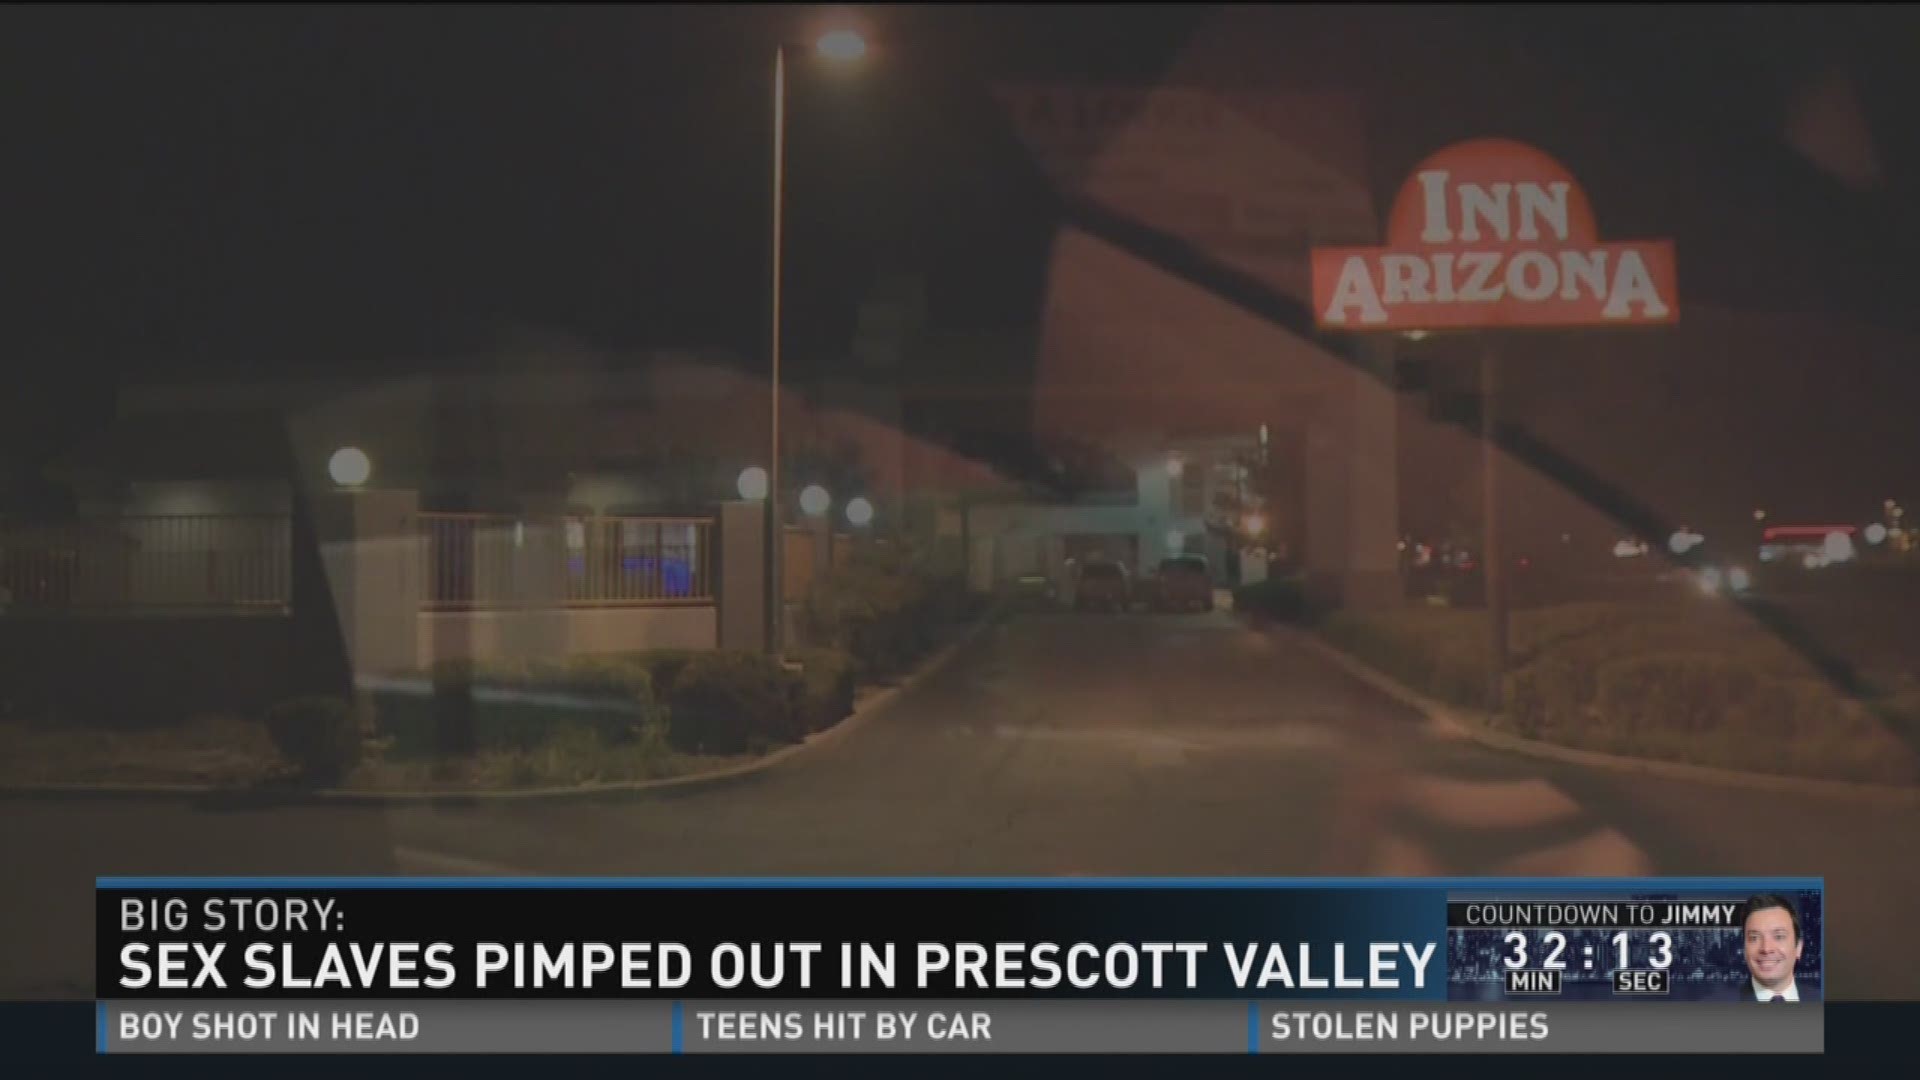 Sex slaves forced to have sex 30 times a day, Prescott Valley PD says 12news pic